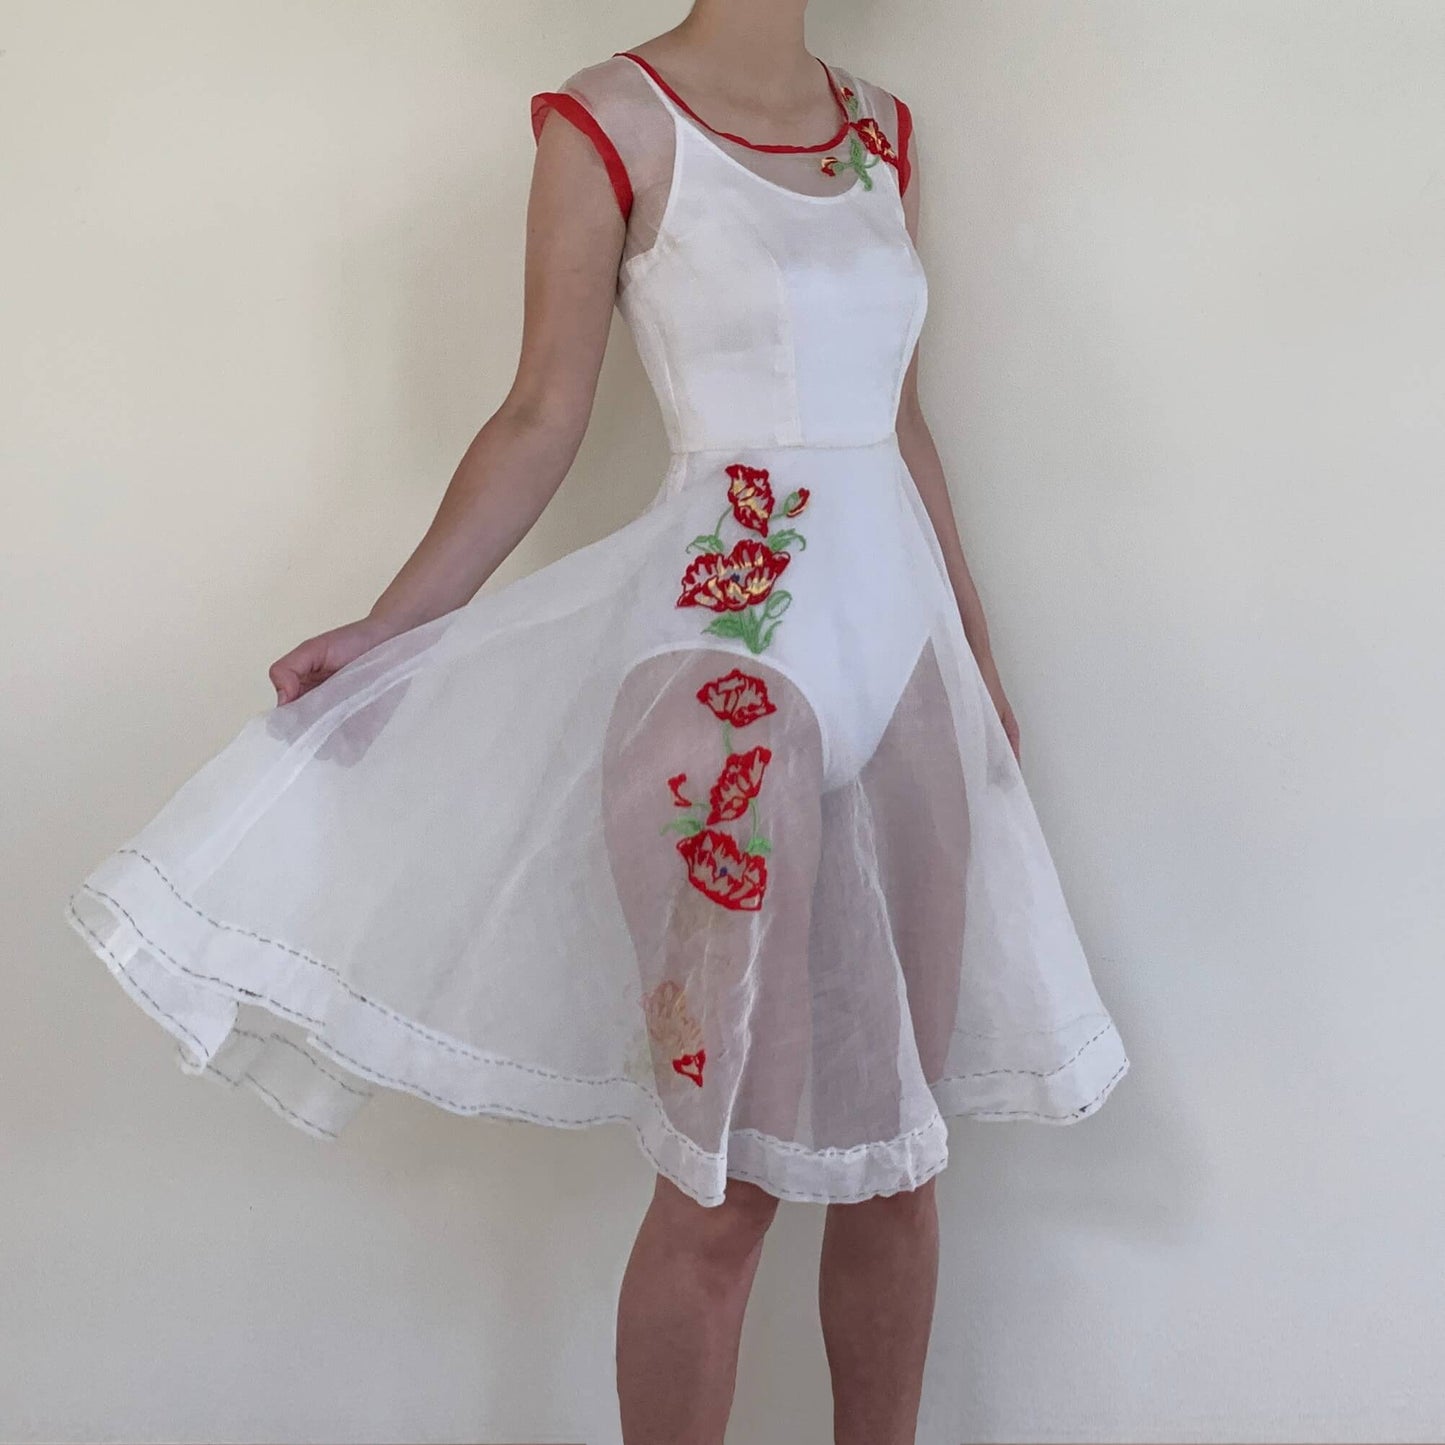 1930s vintage embroidered dress in sheer white fabric with red flowers